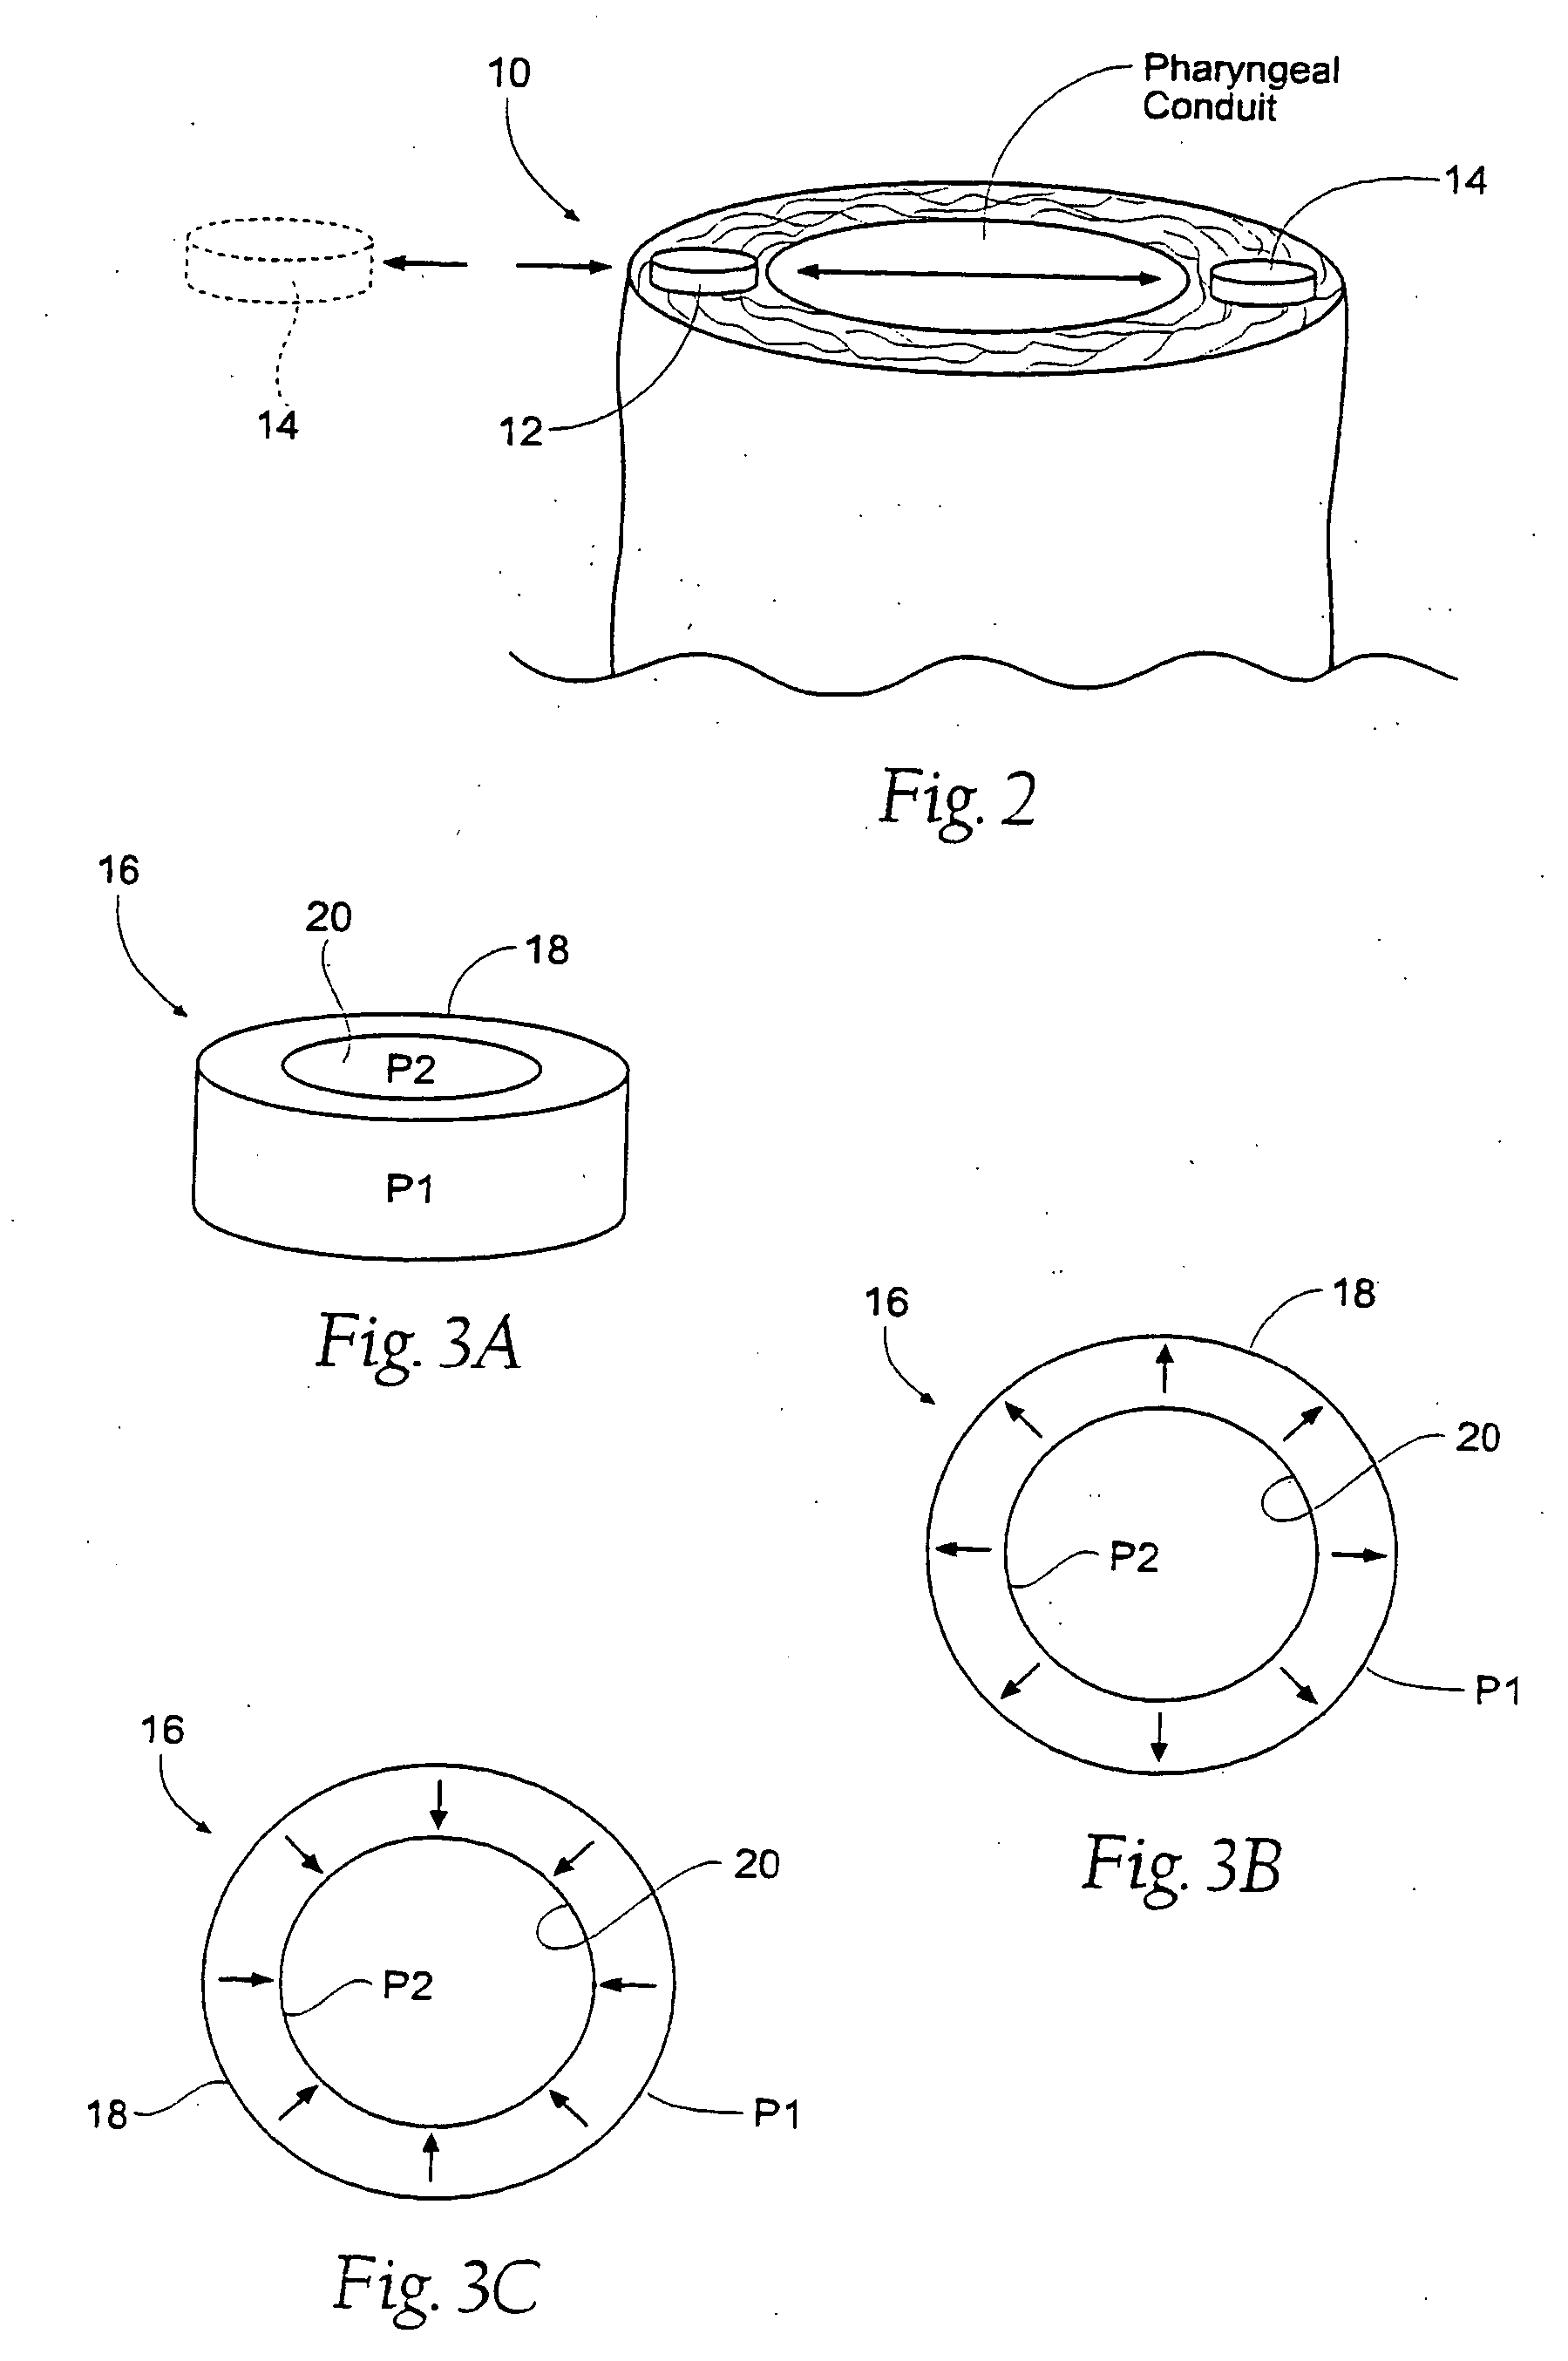 Magnetic force device, systems, and methods for resisting tissue collapse within the pharyngeal conduit